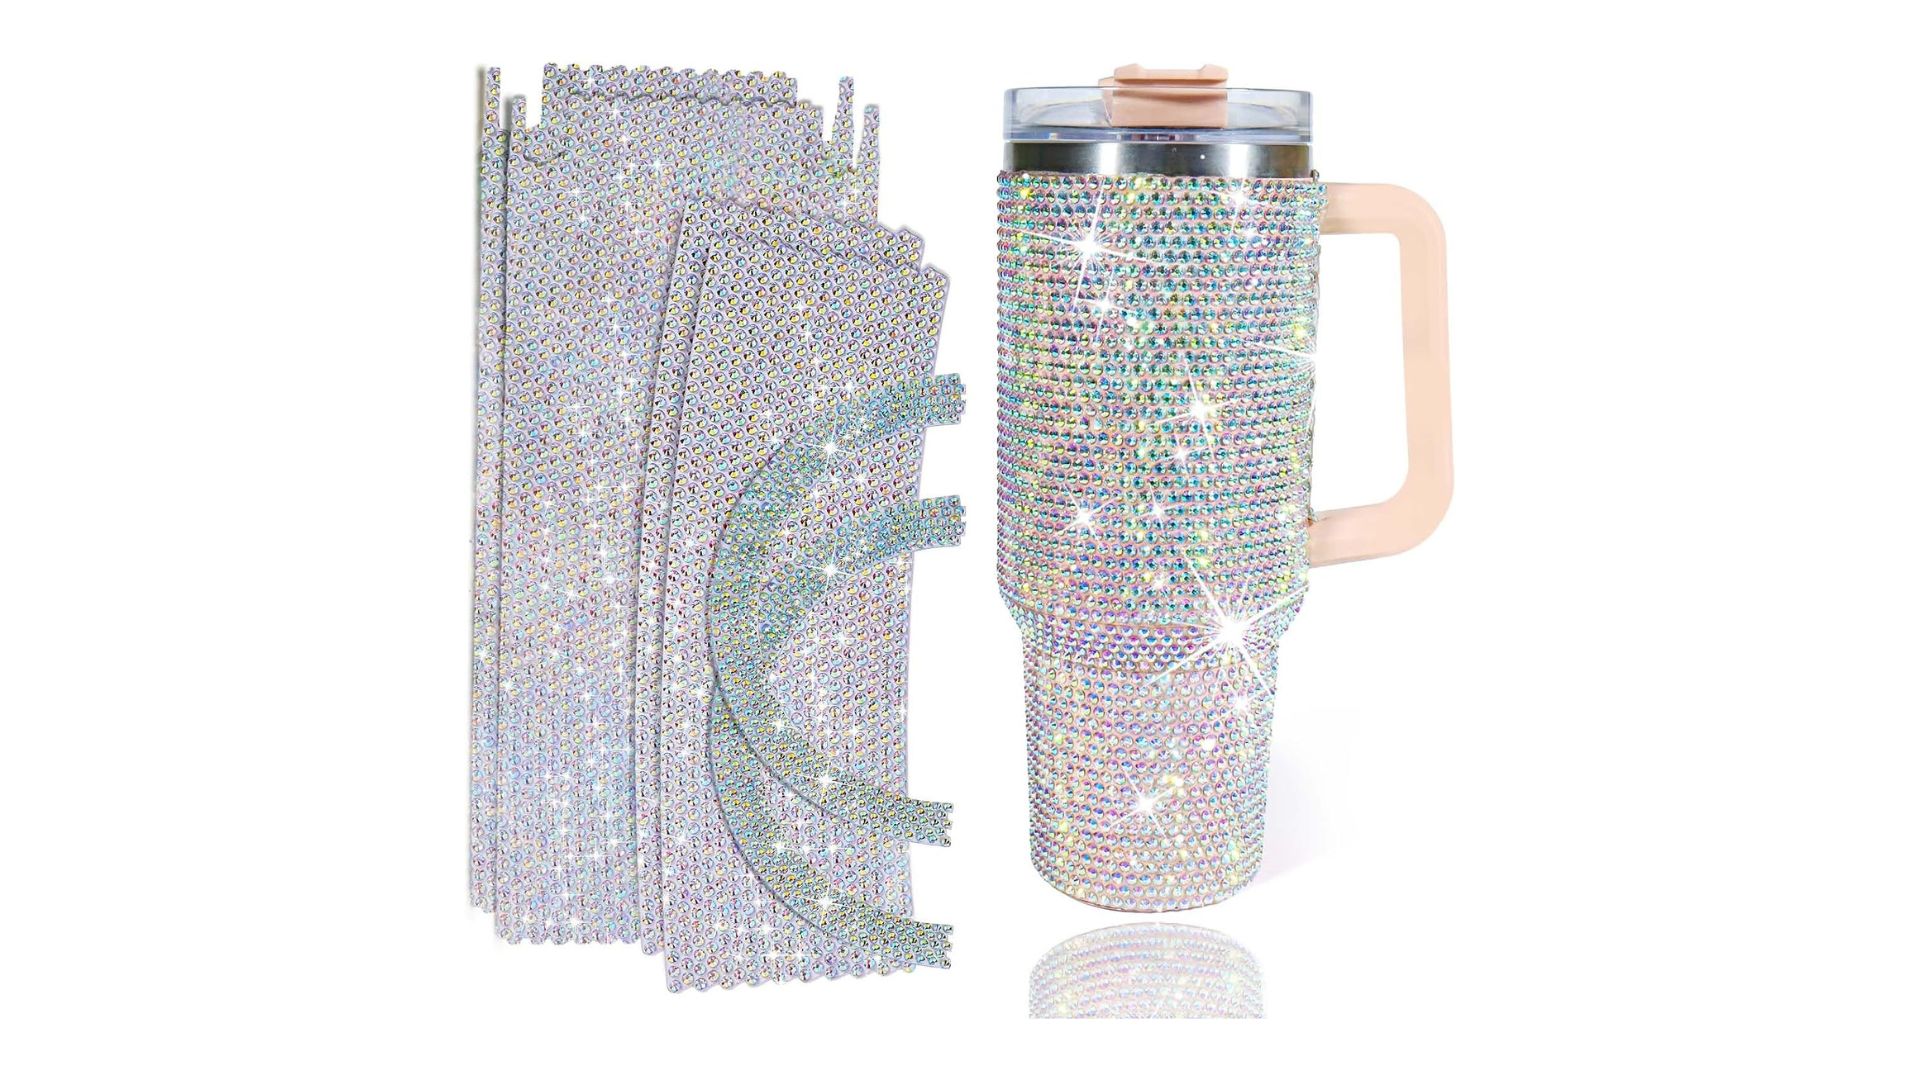 https://onecms-res.cloudinary.com/image/upload/v1690280295/mediacorp/8days/image/2023/07/25/05_aiersa_2pack_rhinestone_stickers_for_stanley_40oz_tumbler.jpg